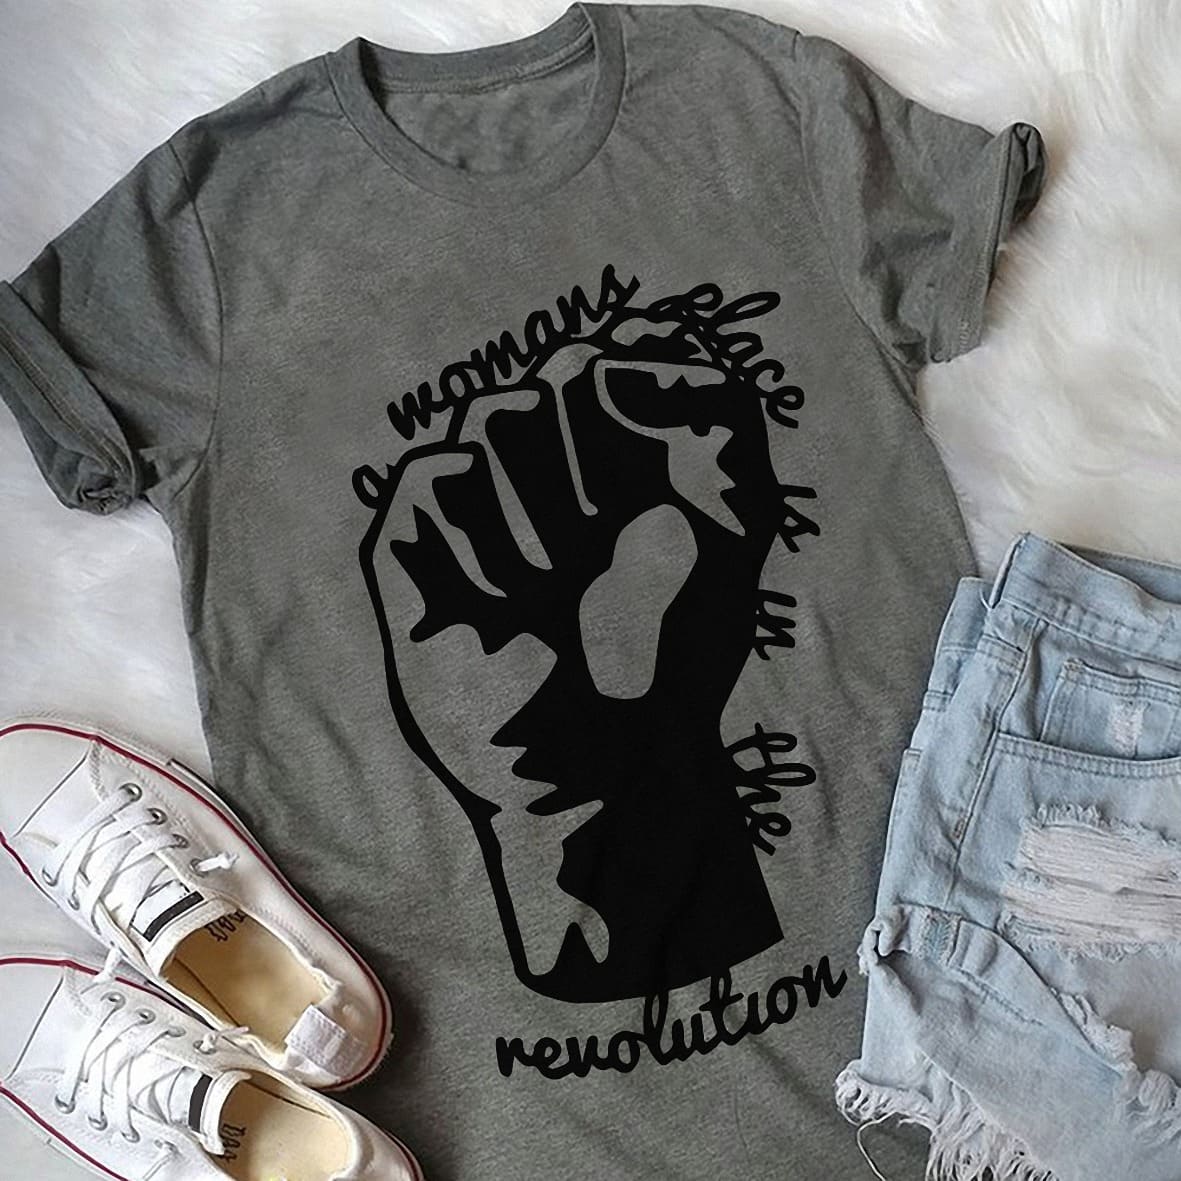 Womans place is in the revolution - Feminism T-shirt, fight for feminism